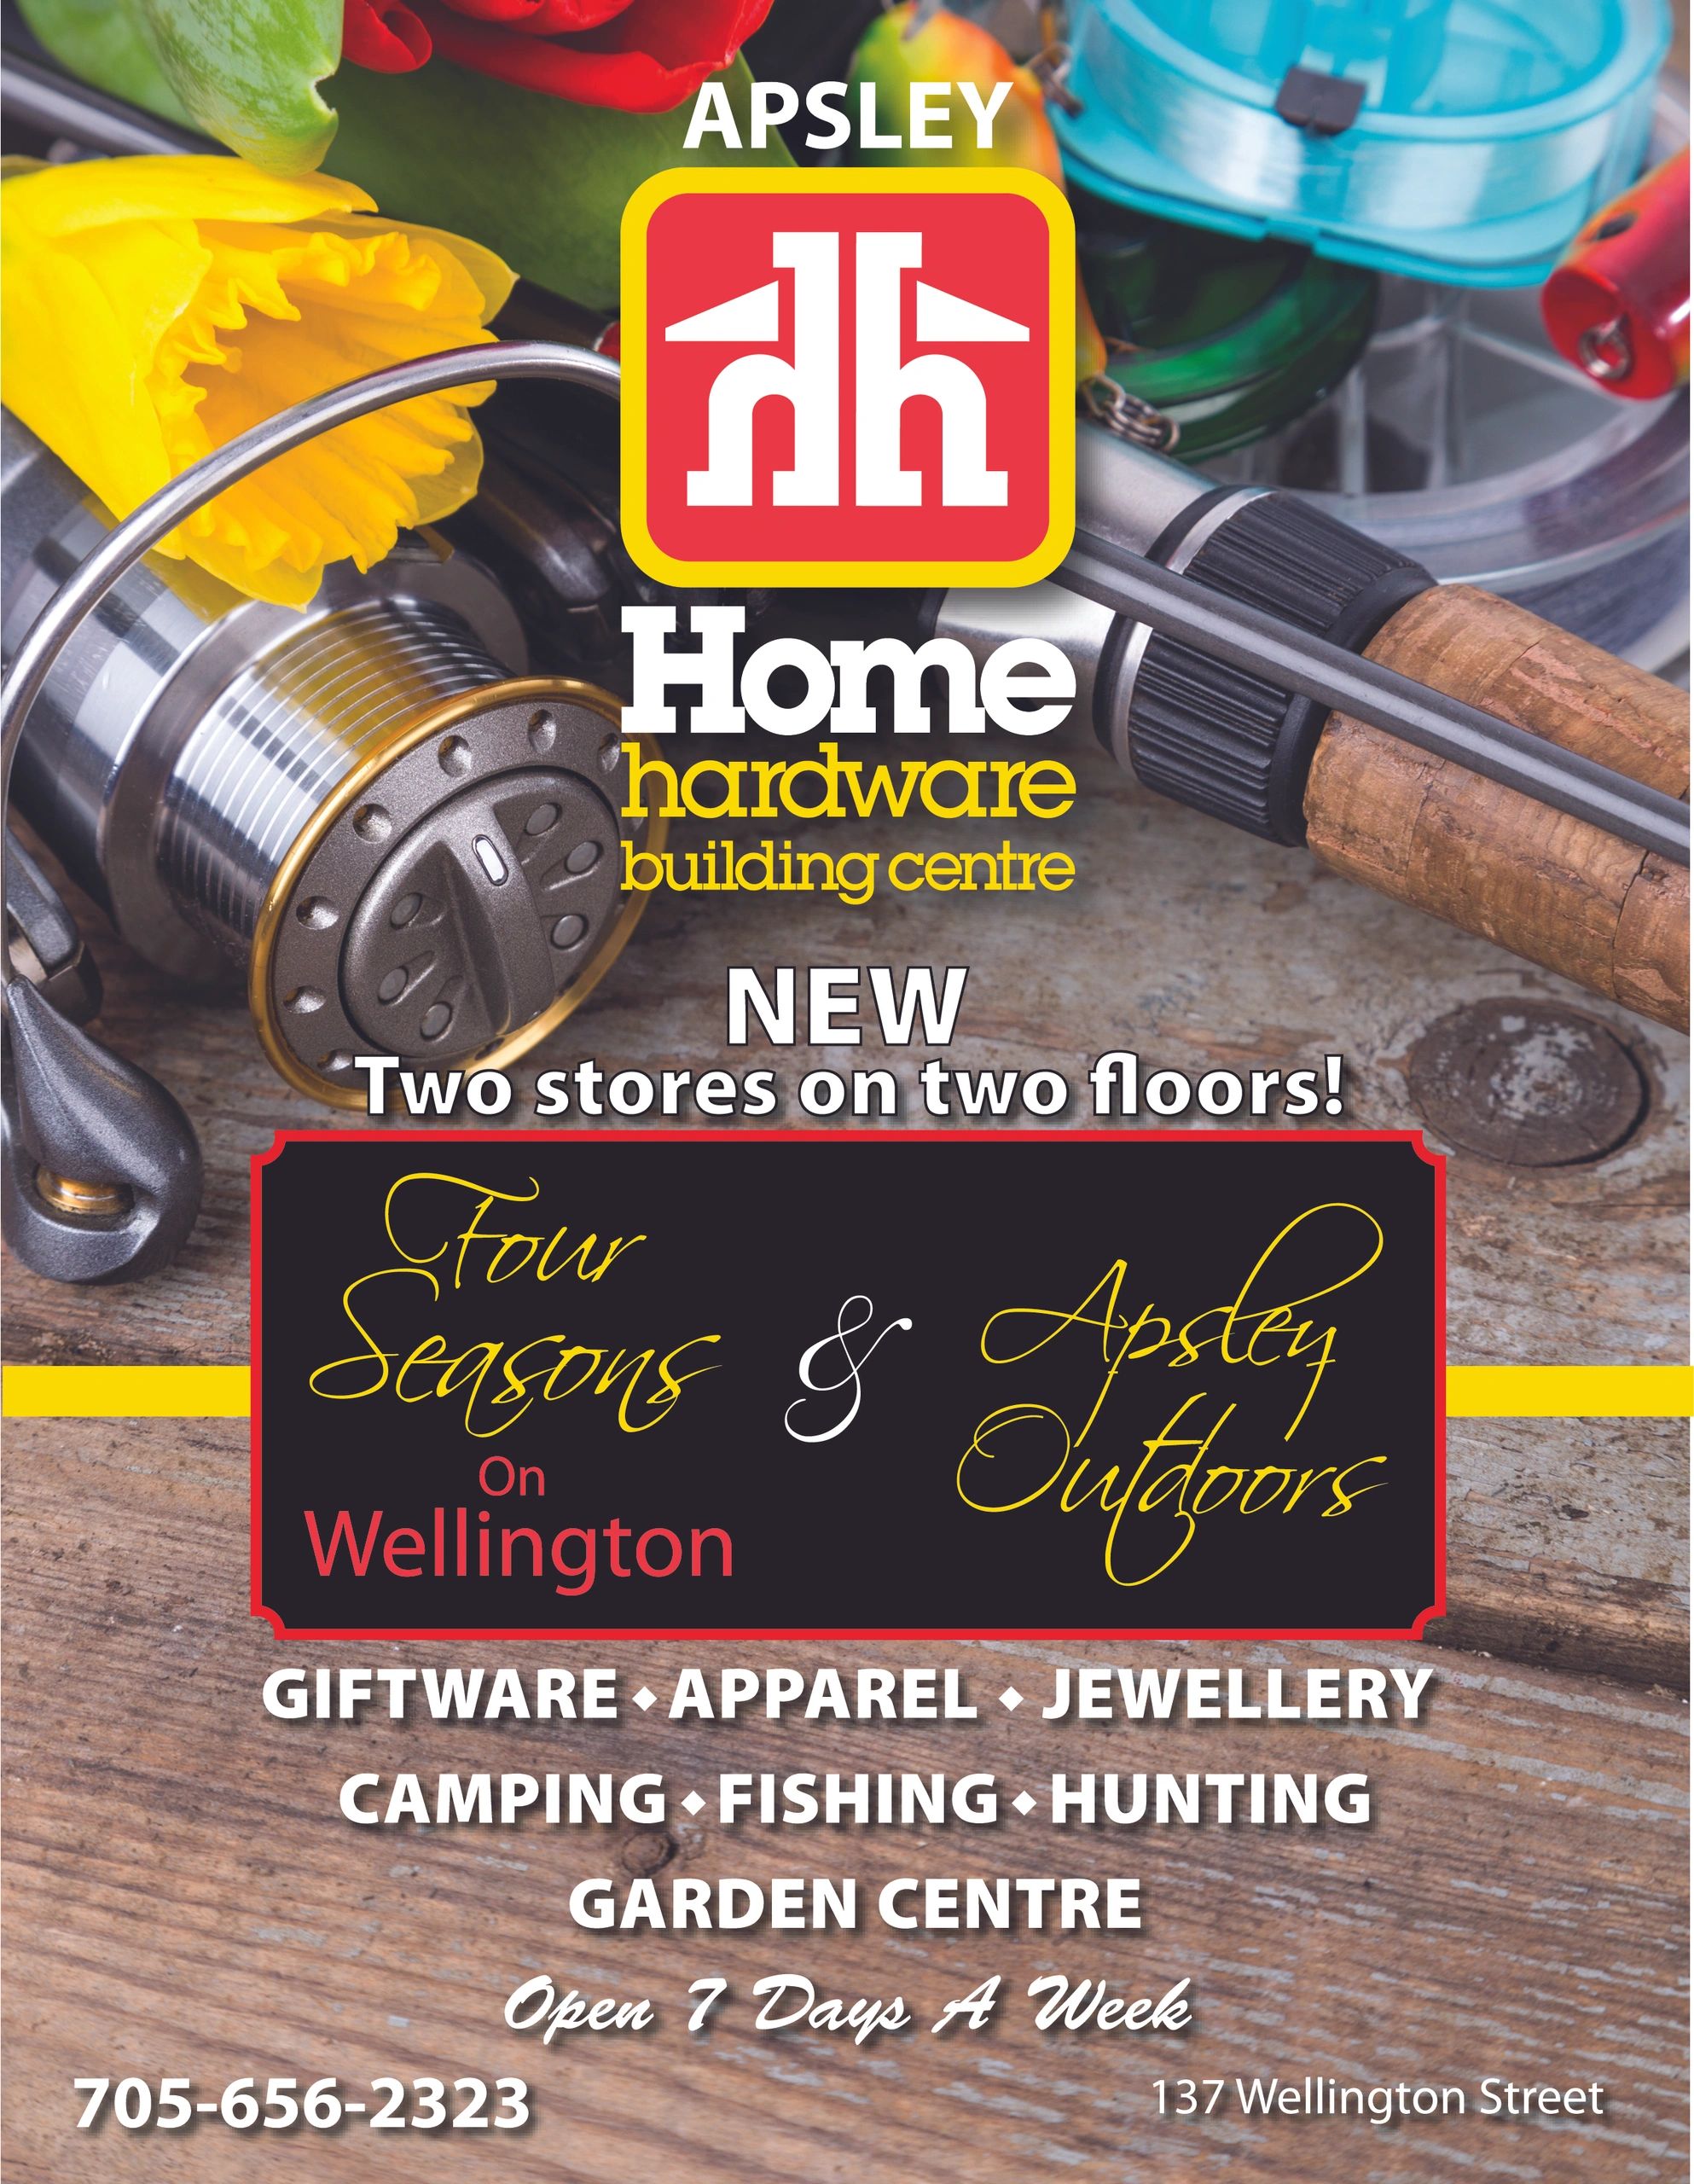 Print Advertising for Apsley Home Hardware Building Centre